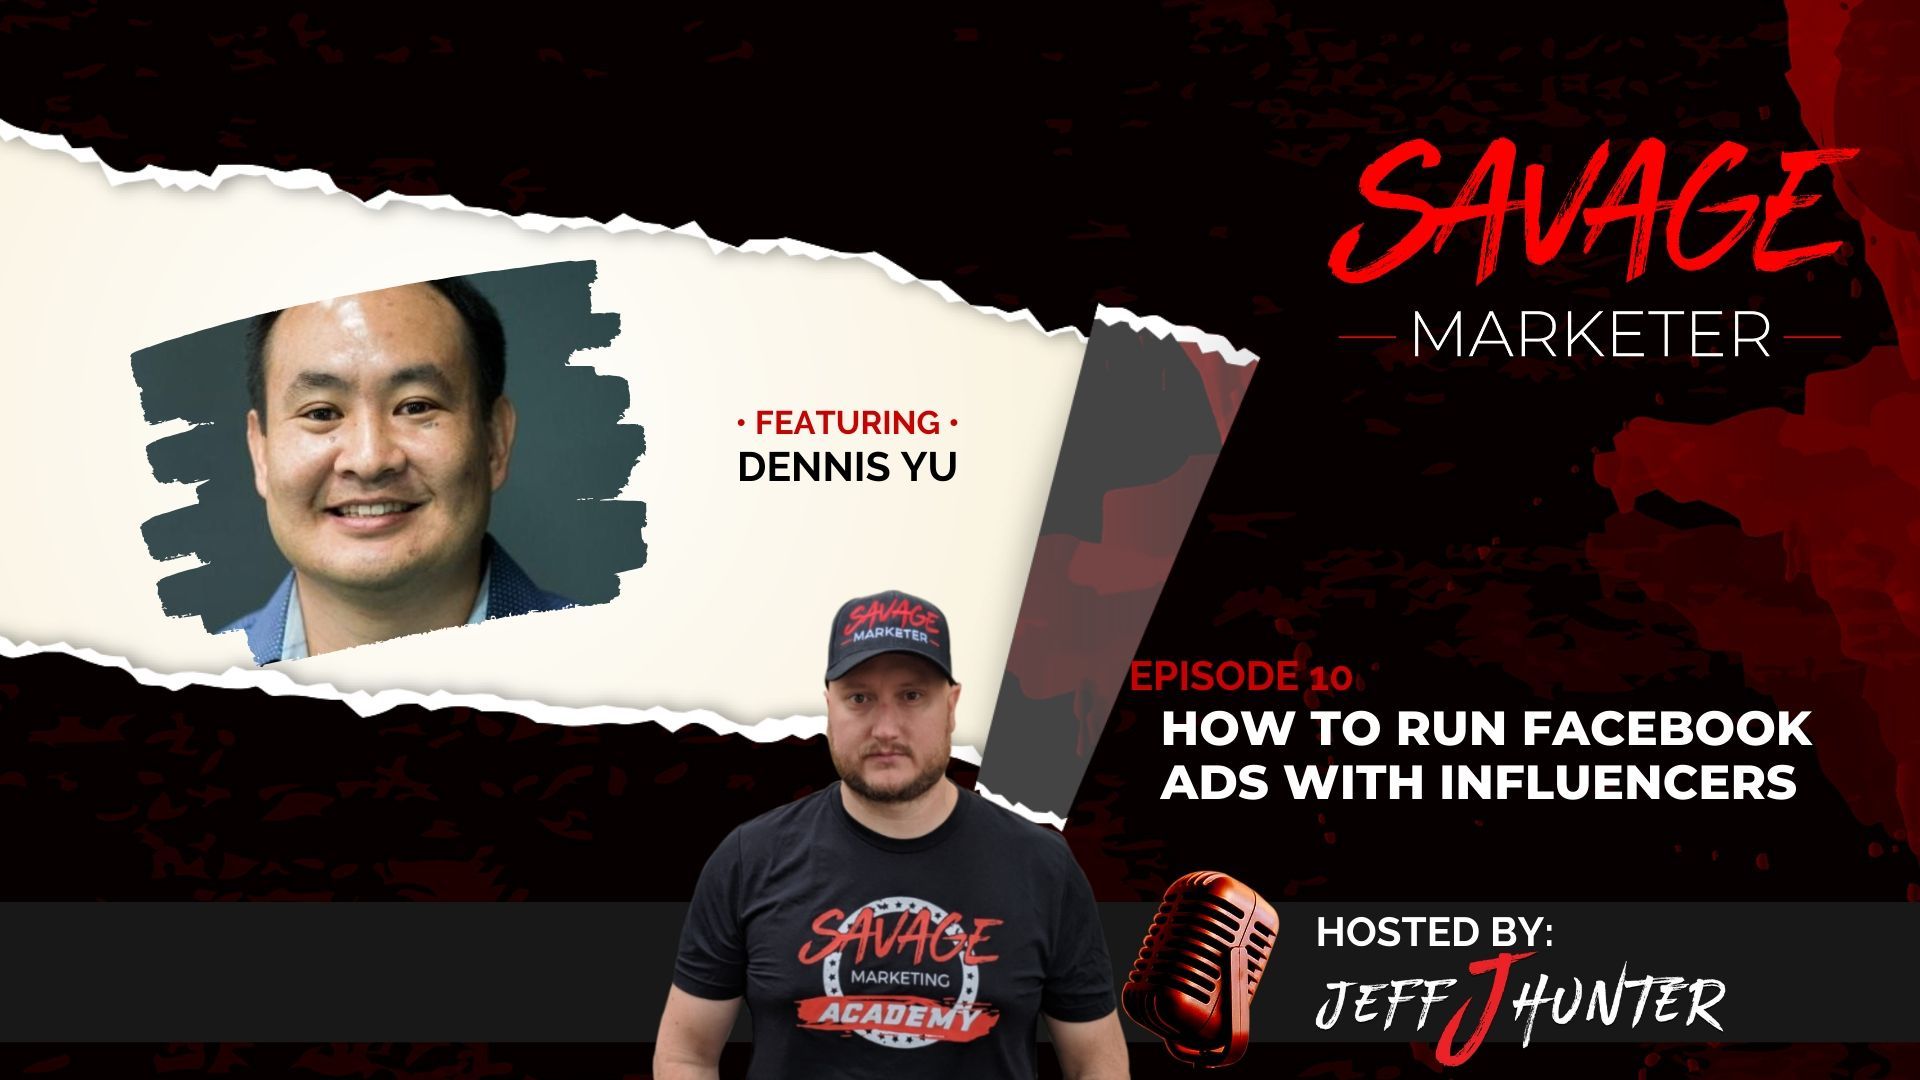 How to Run Facebook Ads with Influencers with Dennis Yu